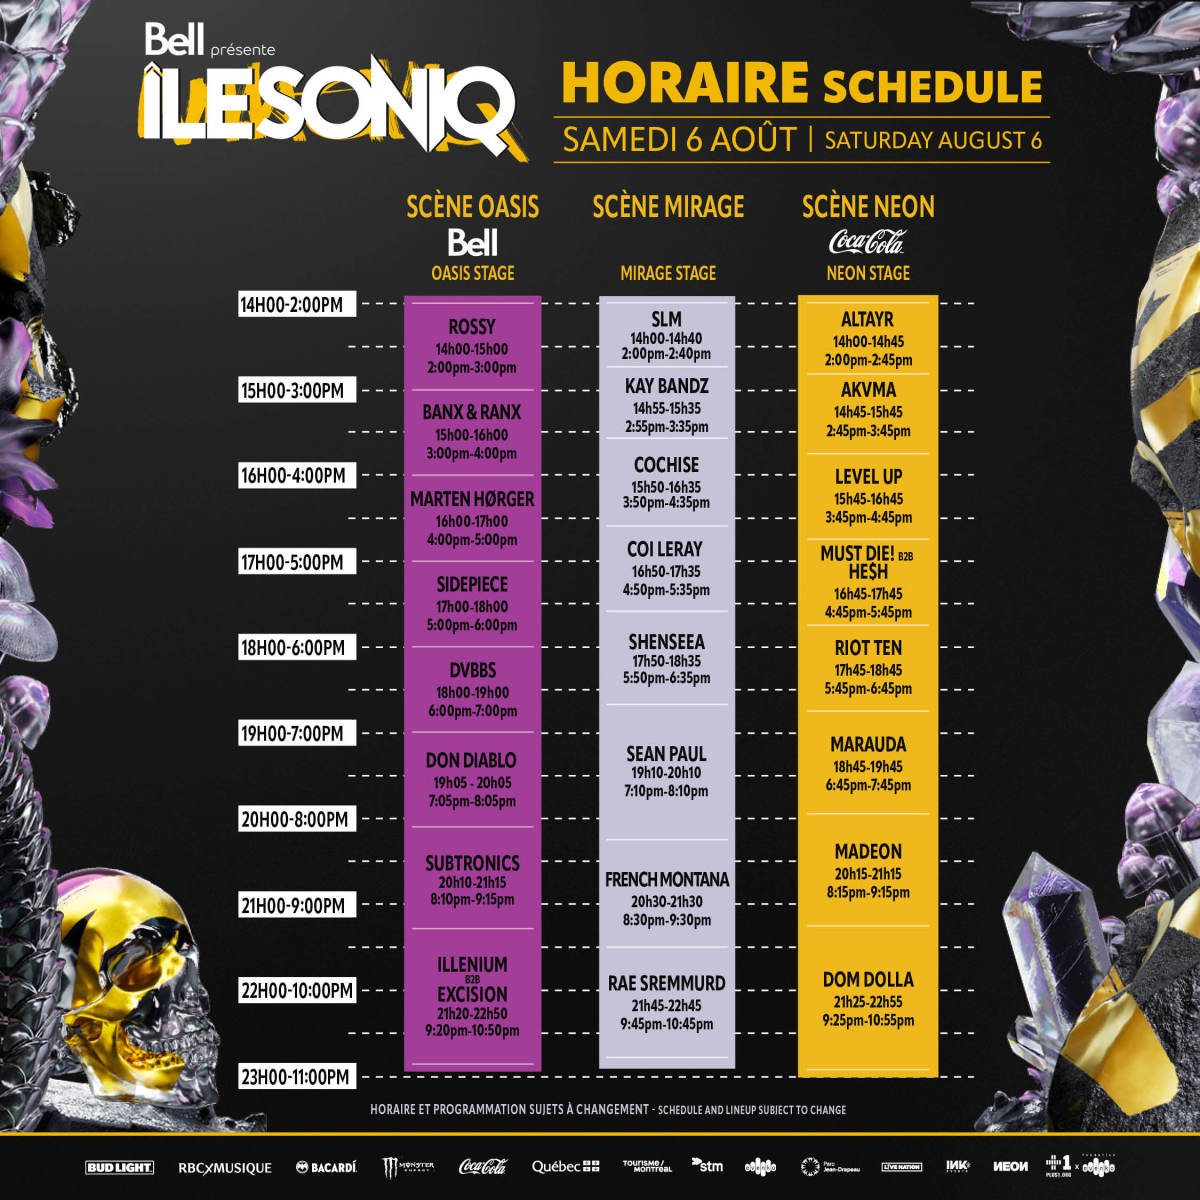 Schedule for August 6th, Day 2 of ÎLESONIQ 2022.